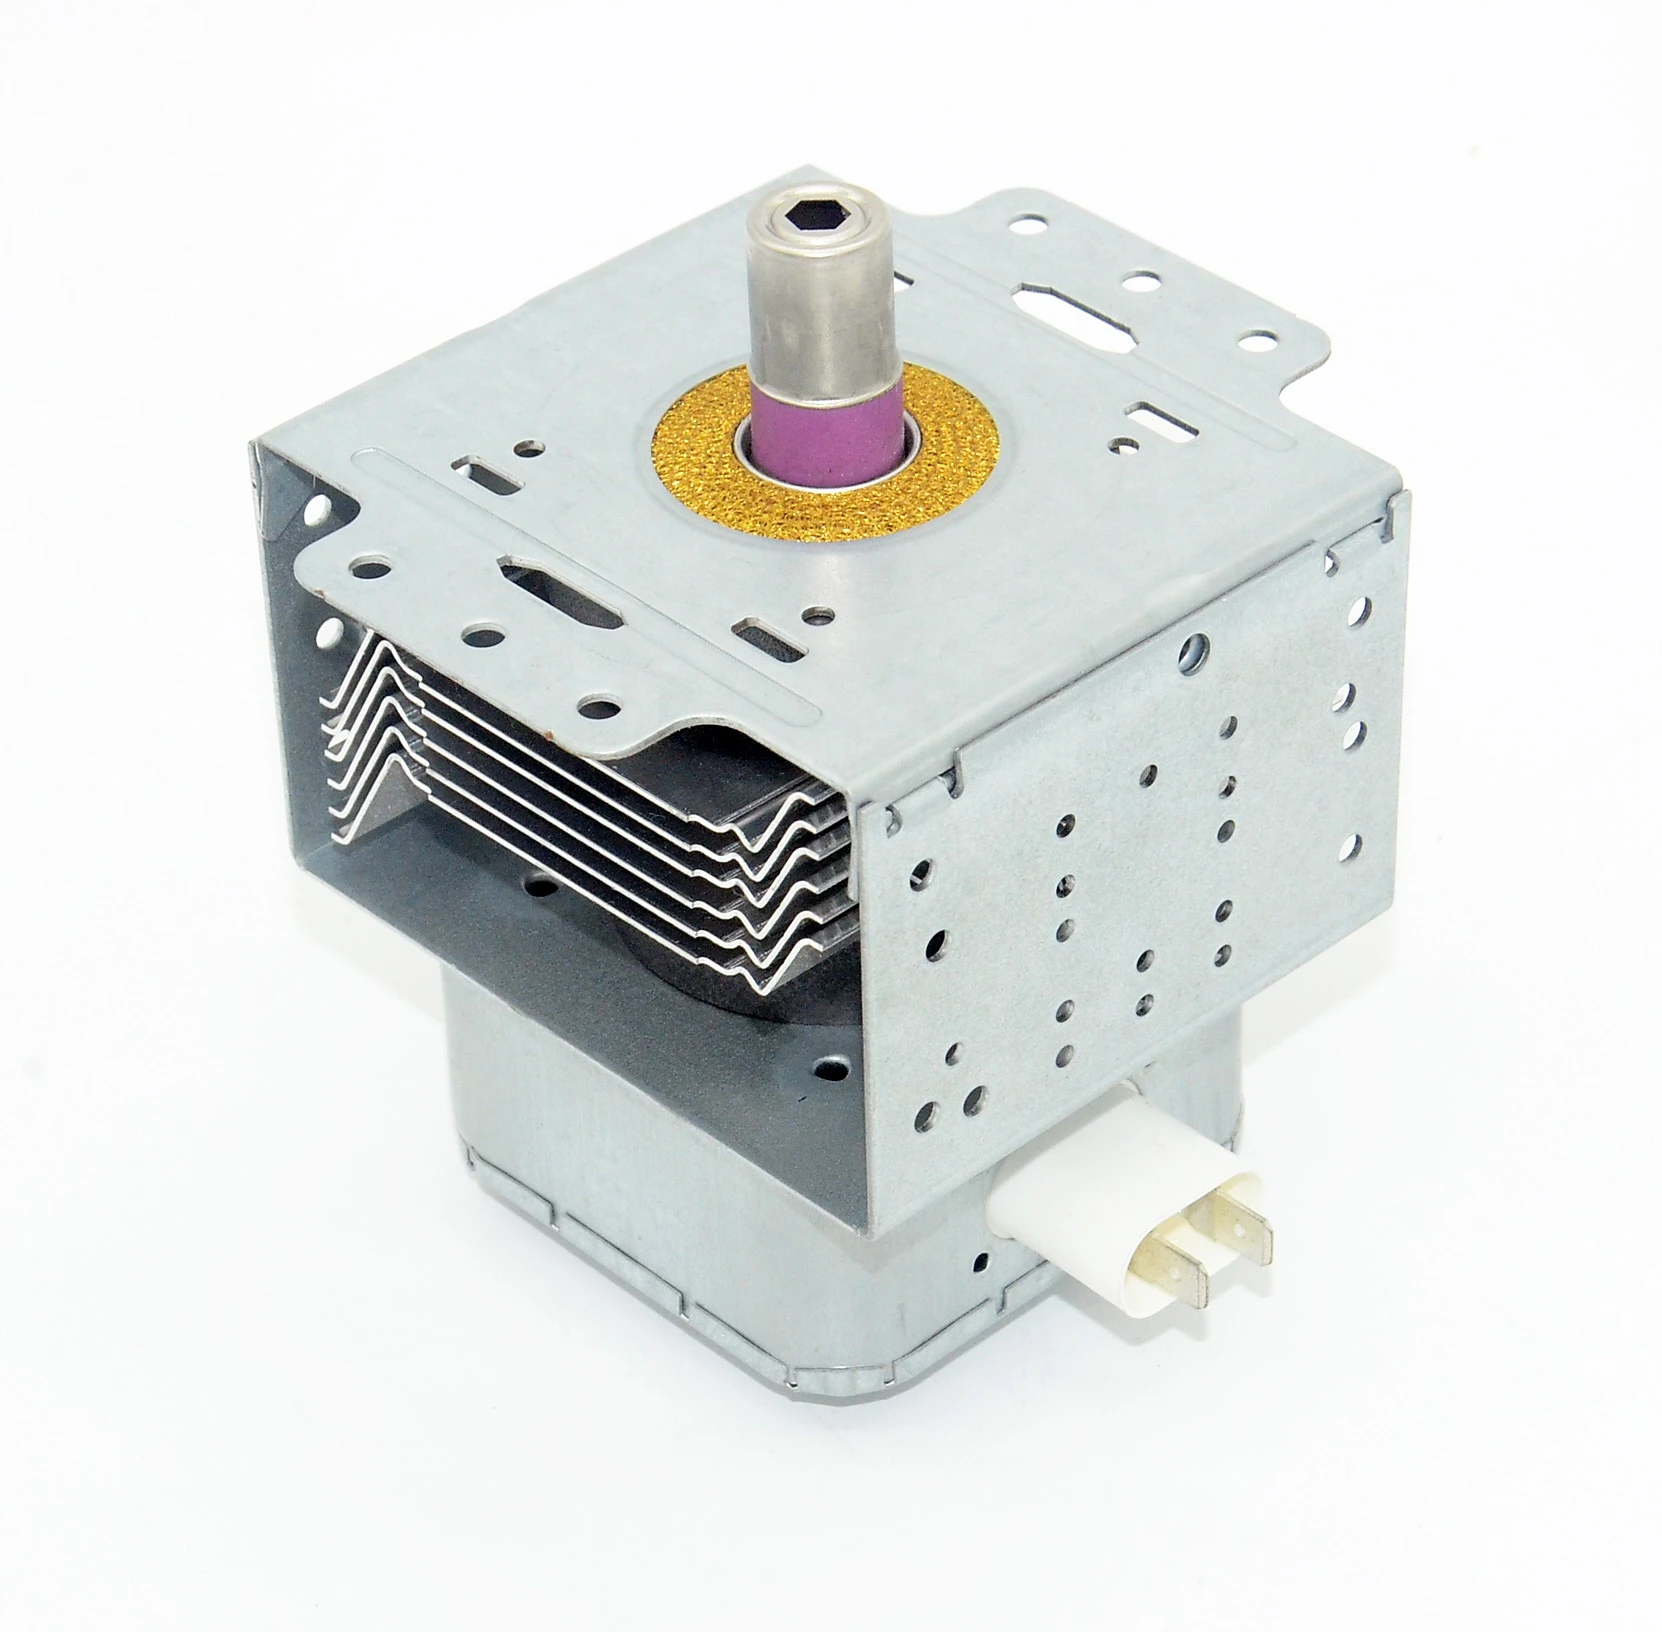 1KW witol power supply air water cool magnetron price 2m246 microwave oven parts magnetron 610a